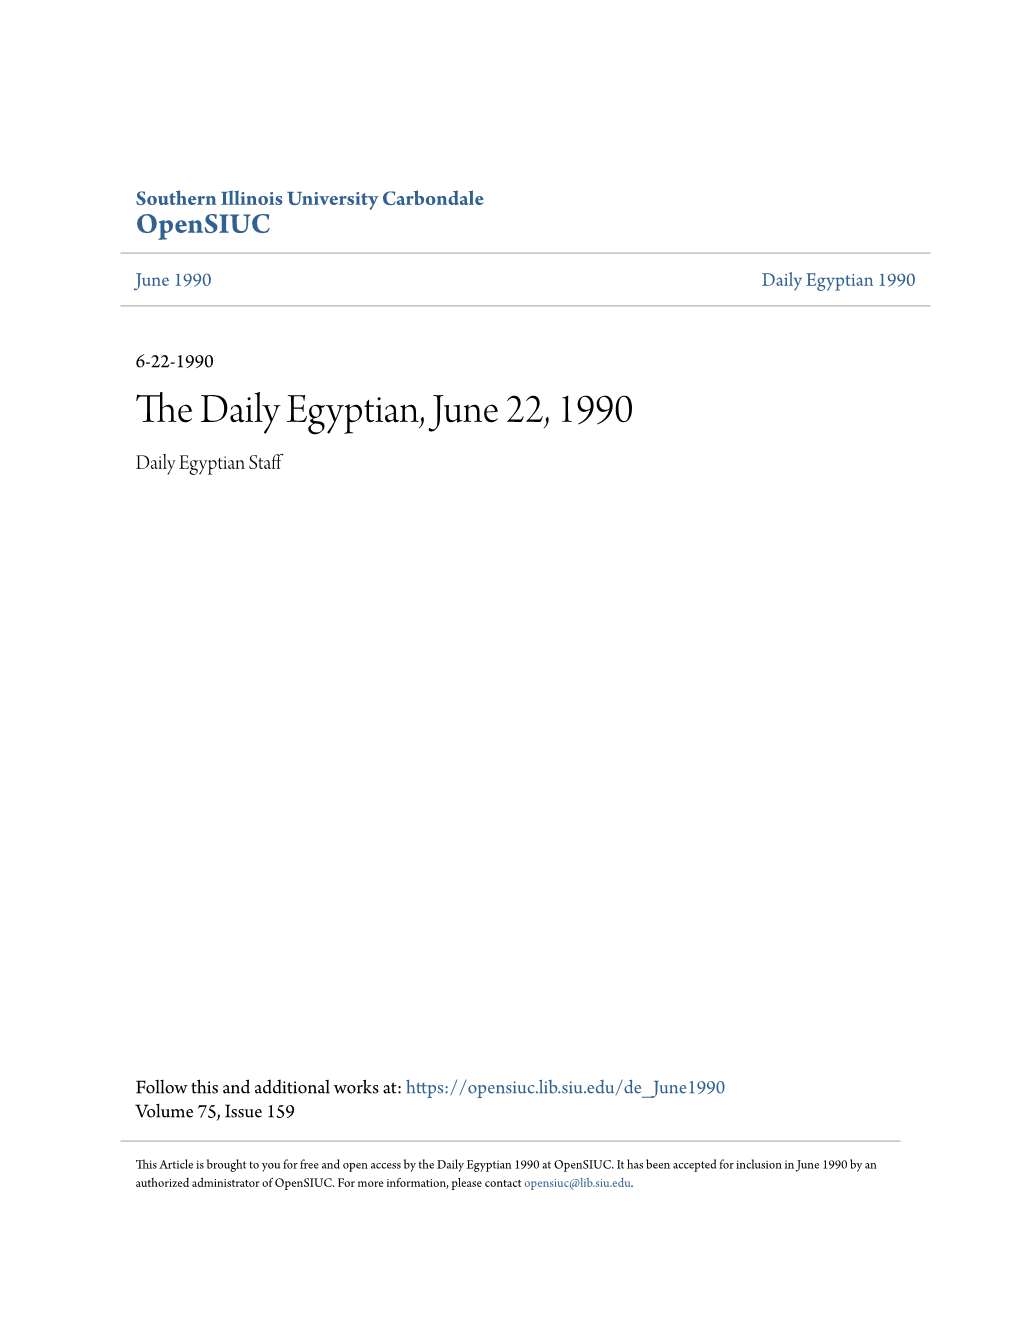 The Daily Egyptian, June 22, 1990